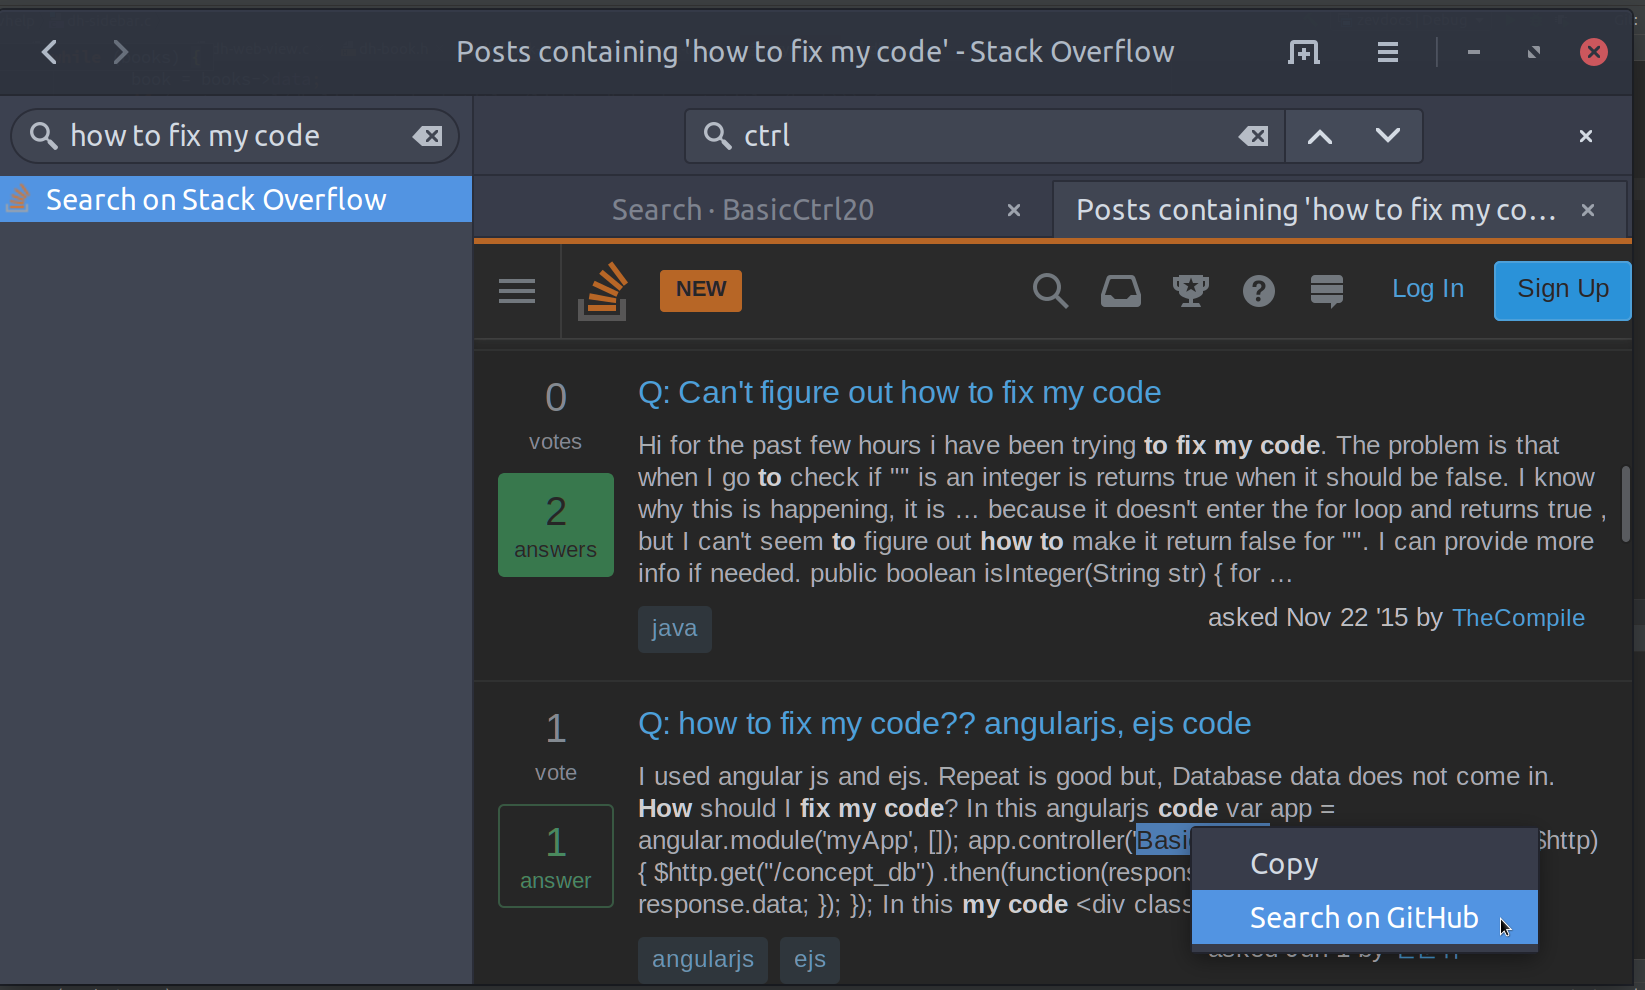 Sreenshot 2: ZevDocs also can search through Stack Overflow and source code on GitHub